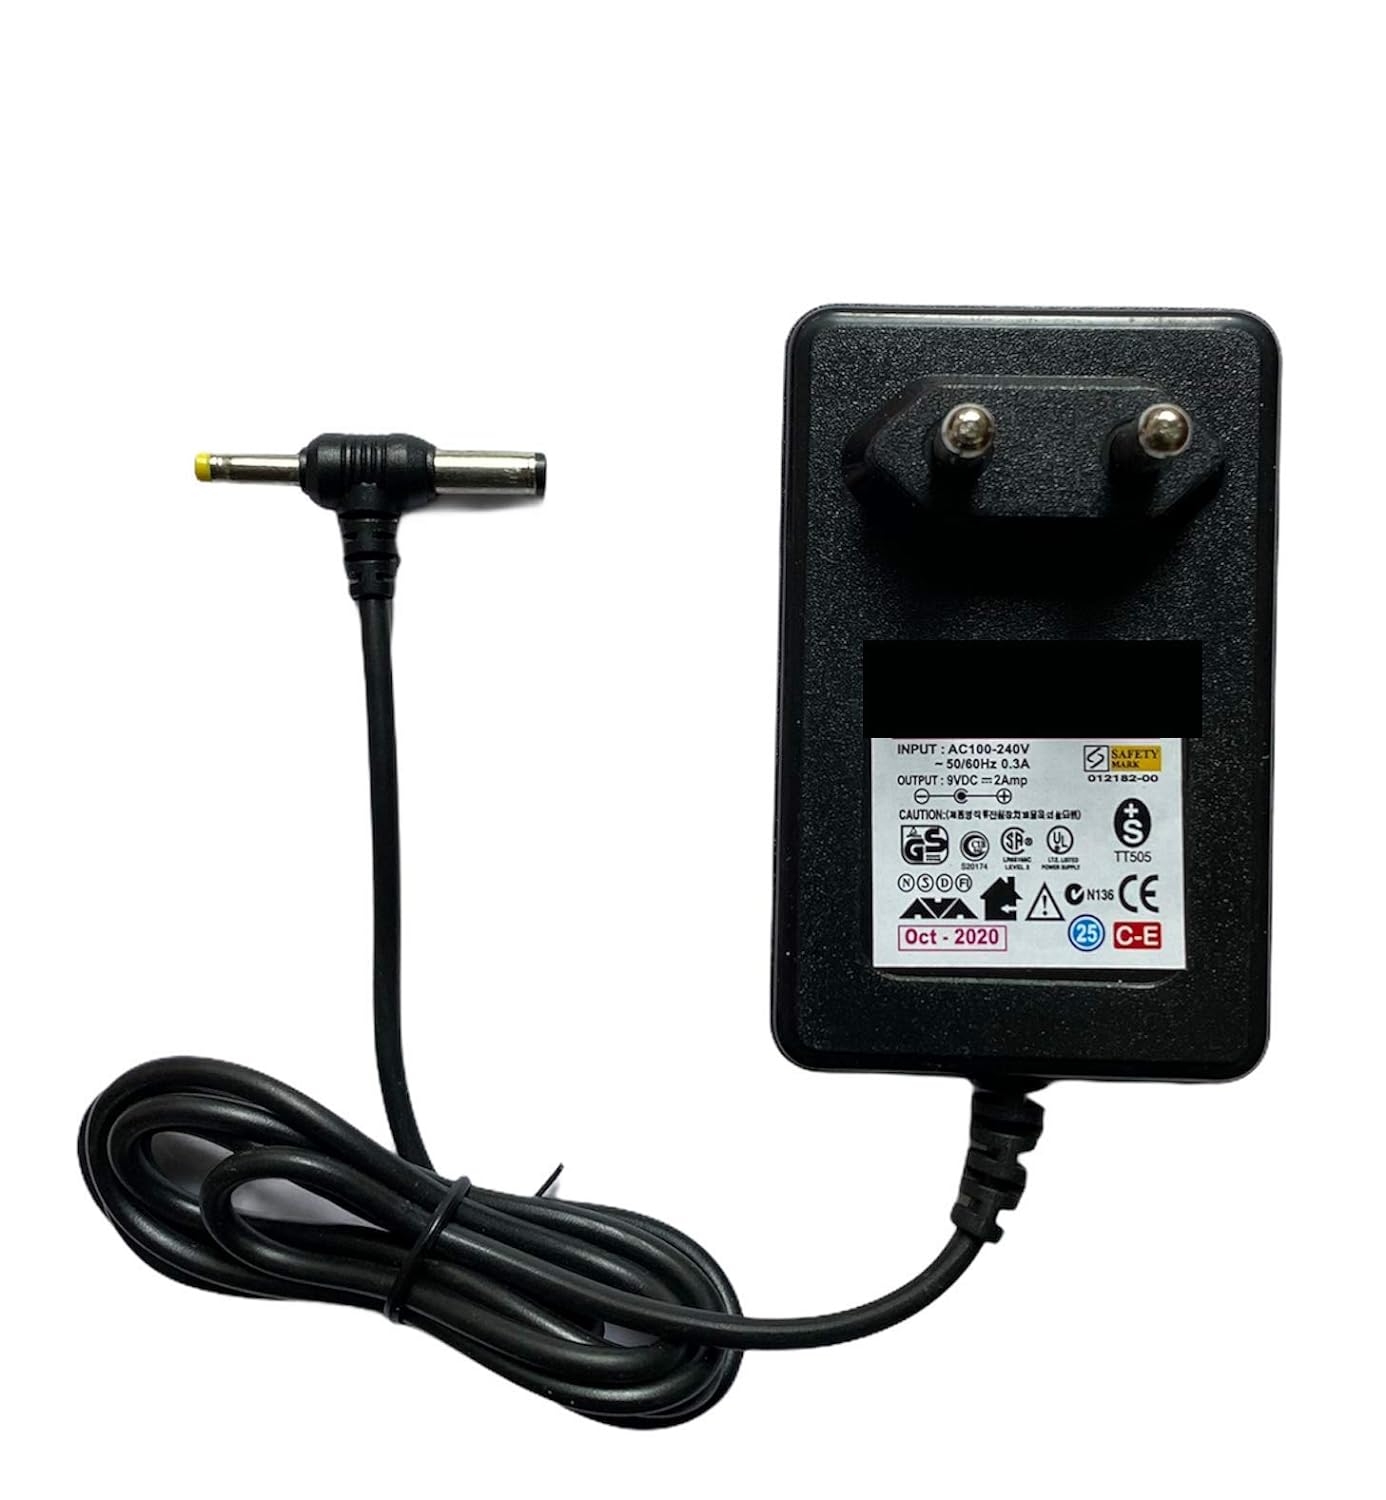 Upix 9 Volt 2 Amp DC Power Adapter, Power Supply AC Input 100-240 Volts with DC & Sony Pin